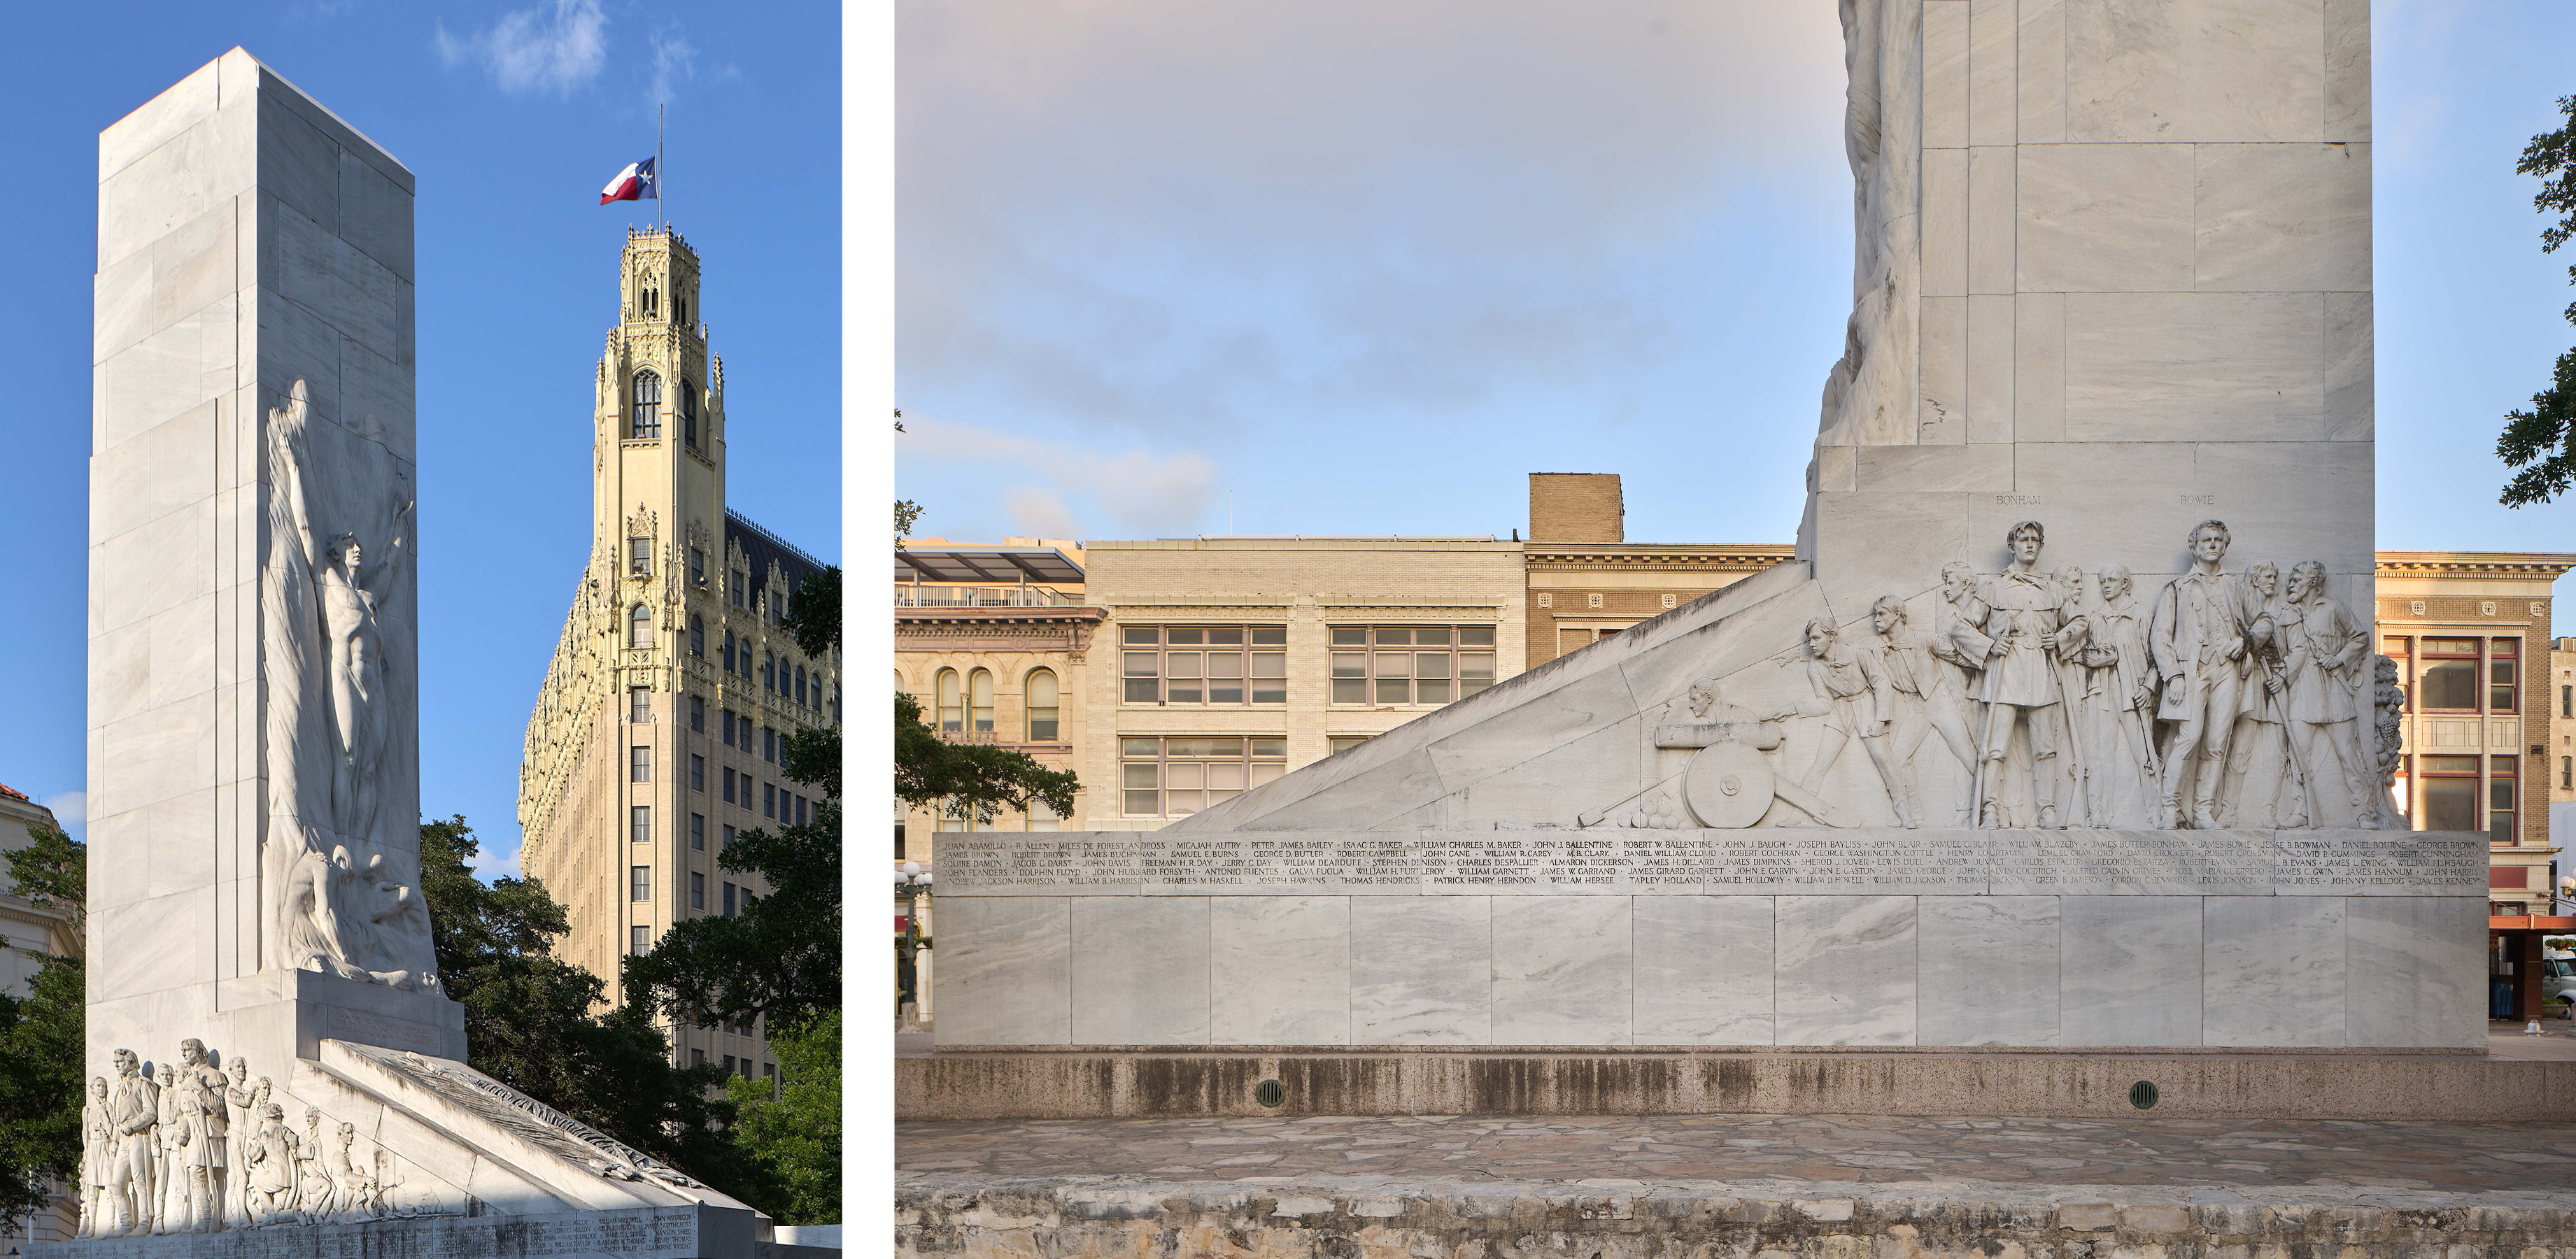 Two photos of the cenotaph at the Alamo